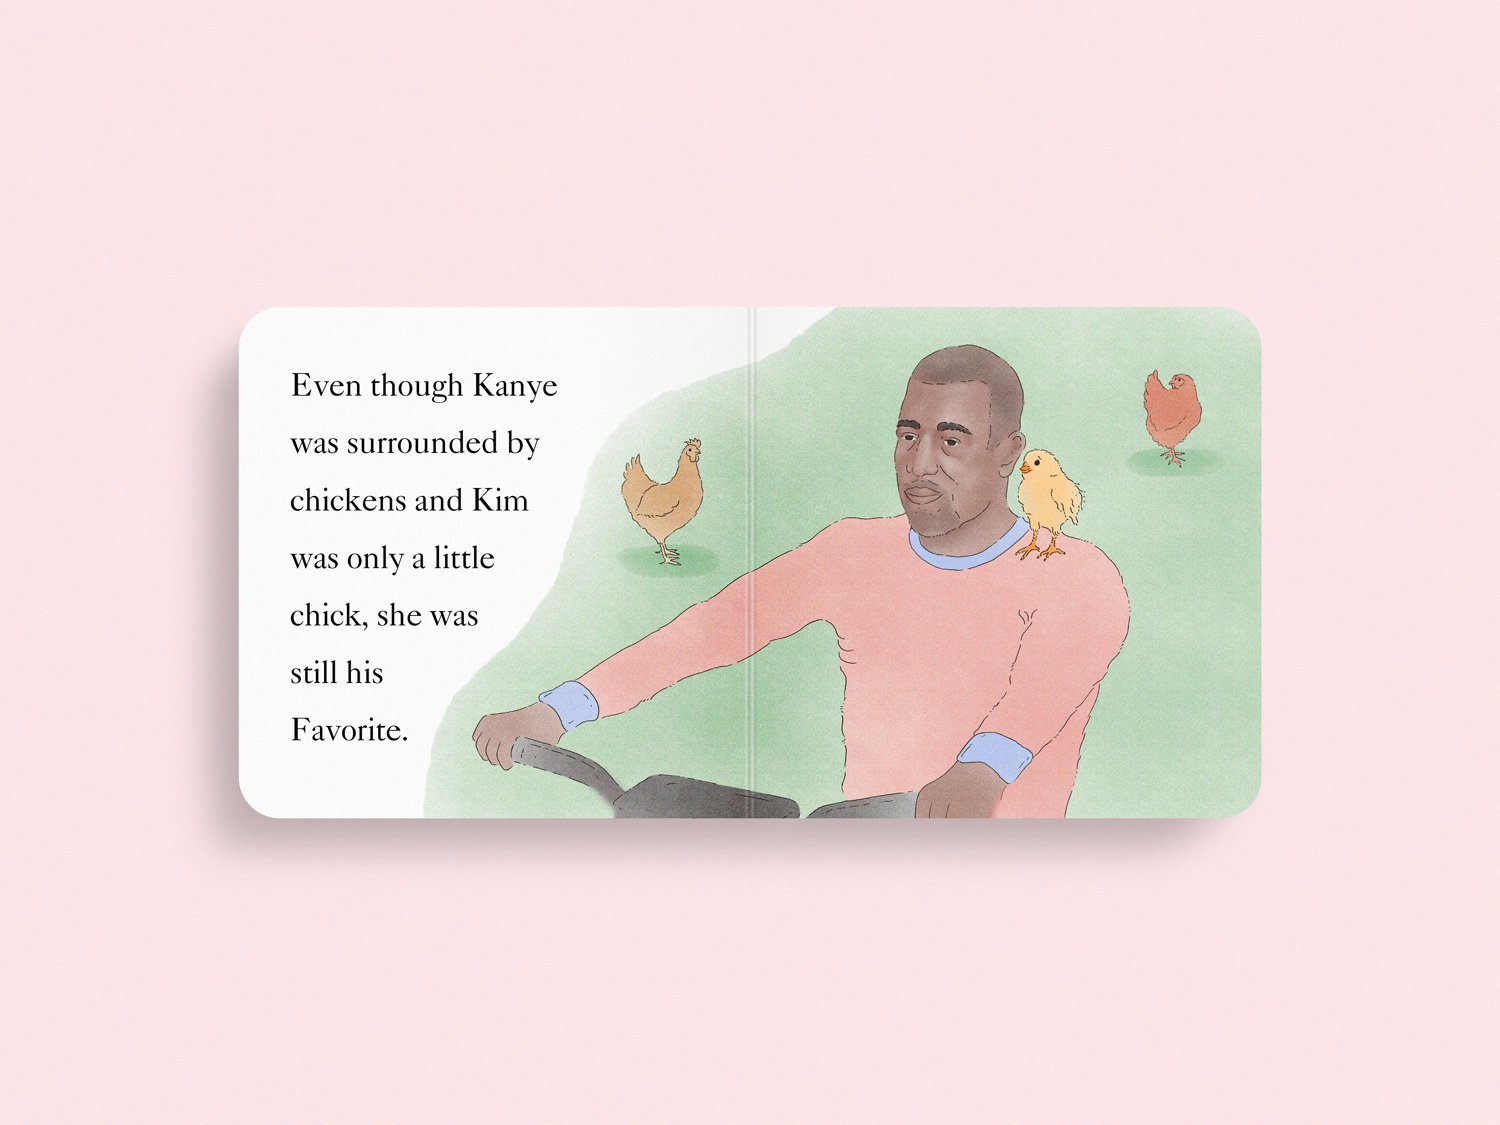 Kaney’s Bound 2 is Now a Children’s Book